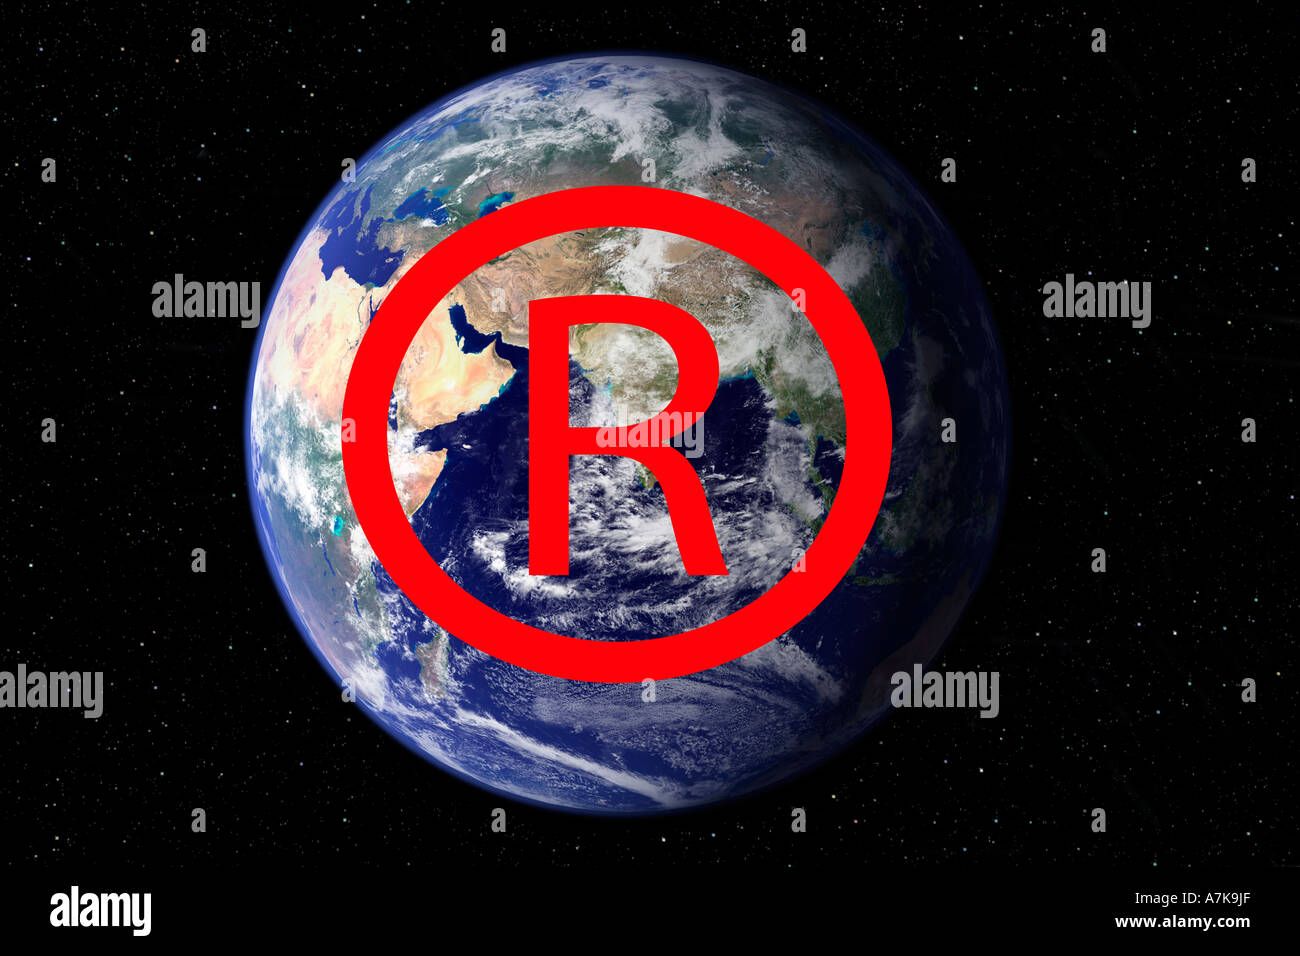 Concept image of the awareness of awareness of Registered Trade Mark symbol now used to fight Piracy. Stock Photo